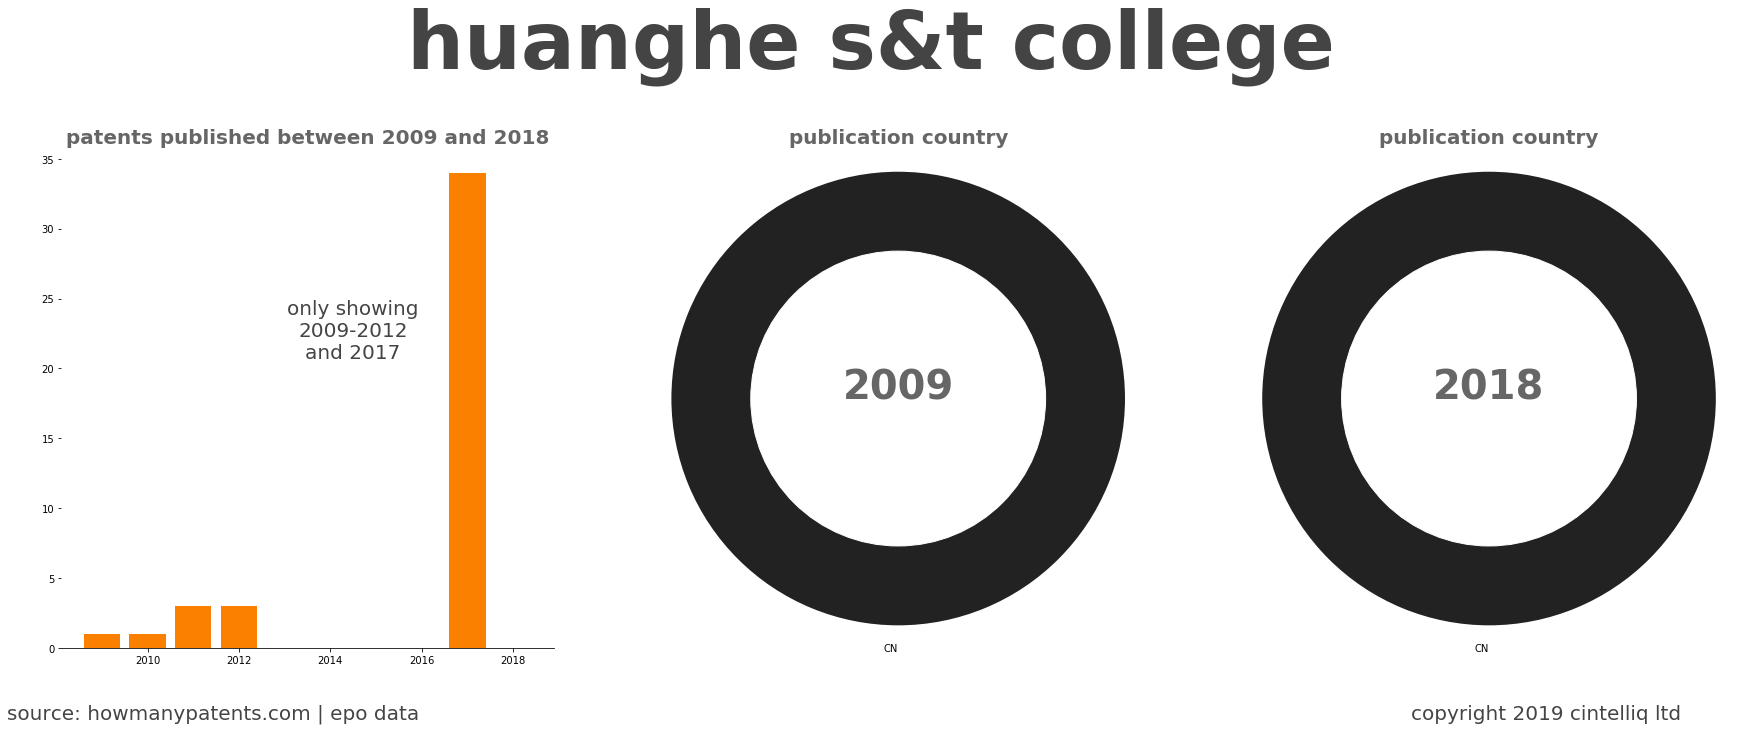 summary of patents for Huanghe S&T College